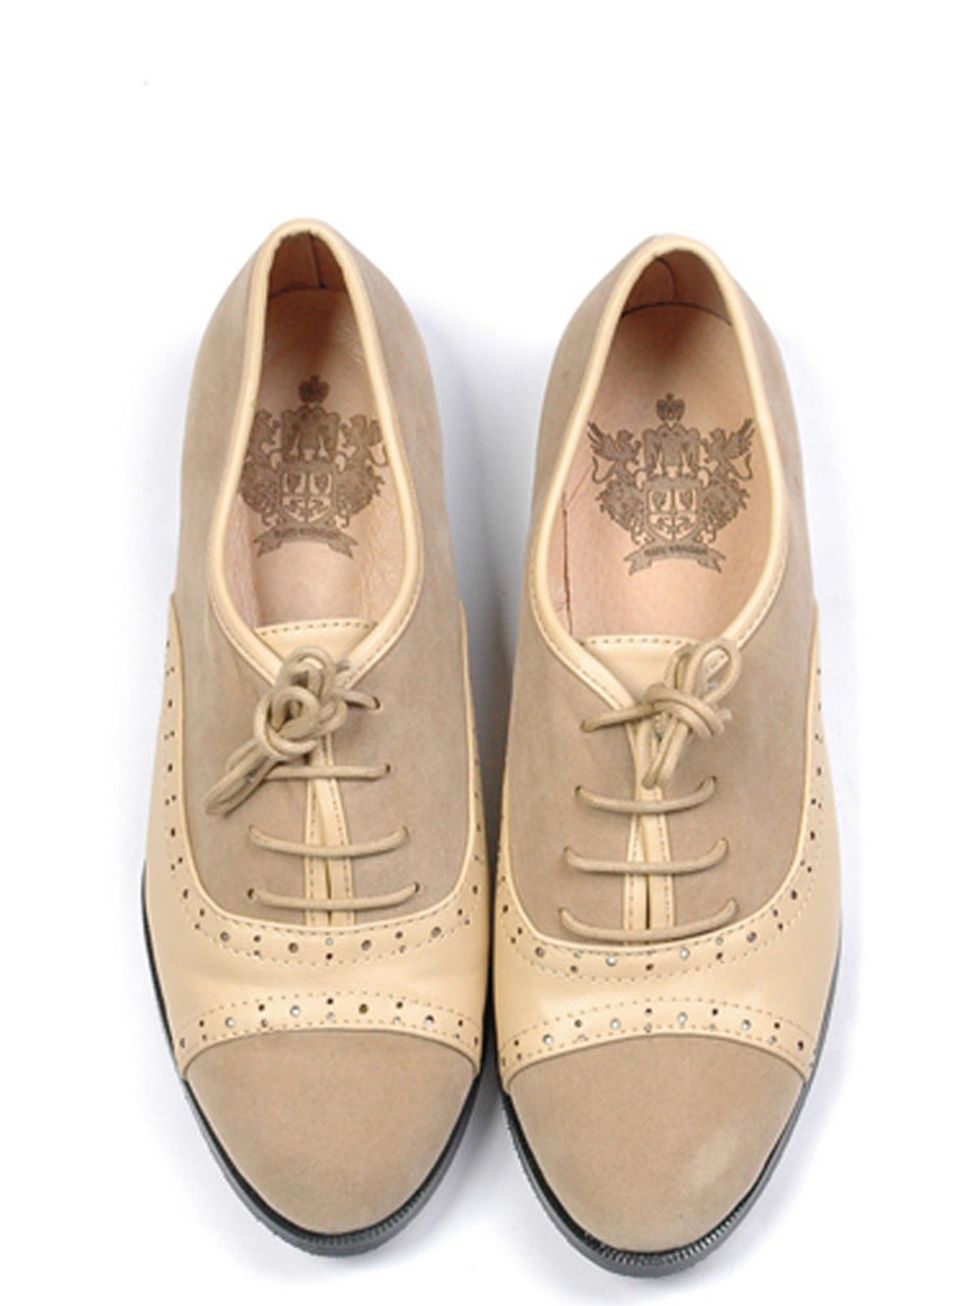 <p>Nude brogues, £30, by <a href="http://www.katekanzier.com/department/B81585D2-8FA9-4ED7-B1BC-6B91FC930AF1/brogues">Kate Kanzier</a> </p>